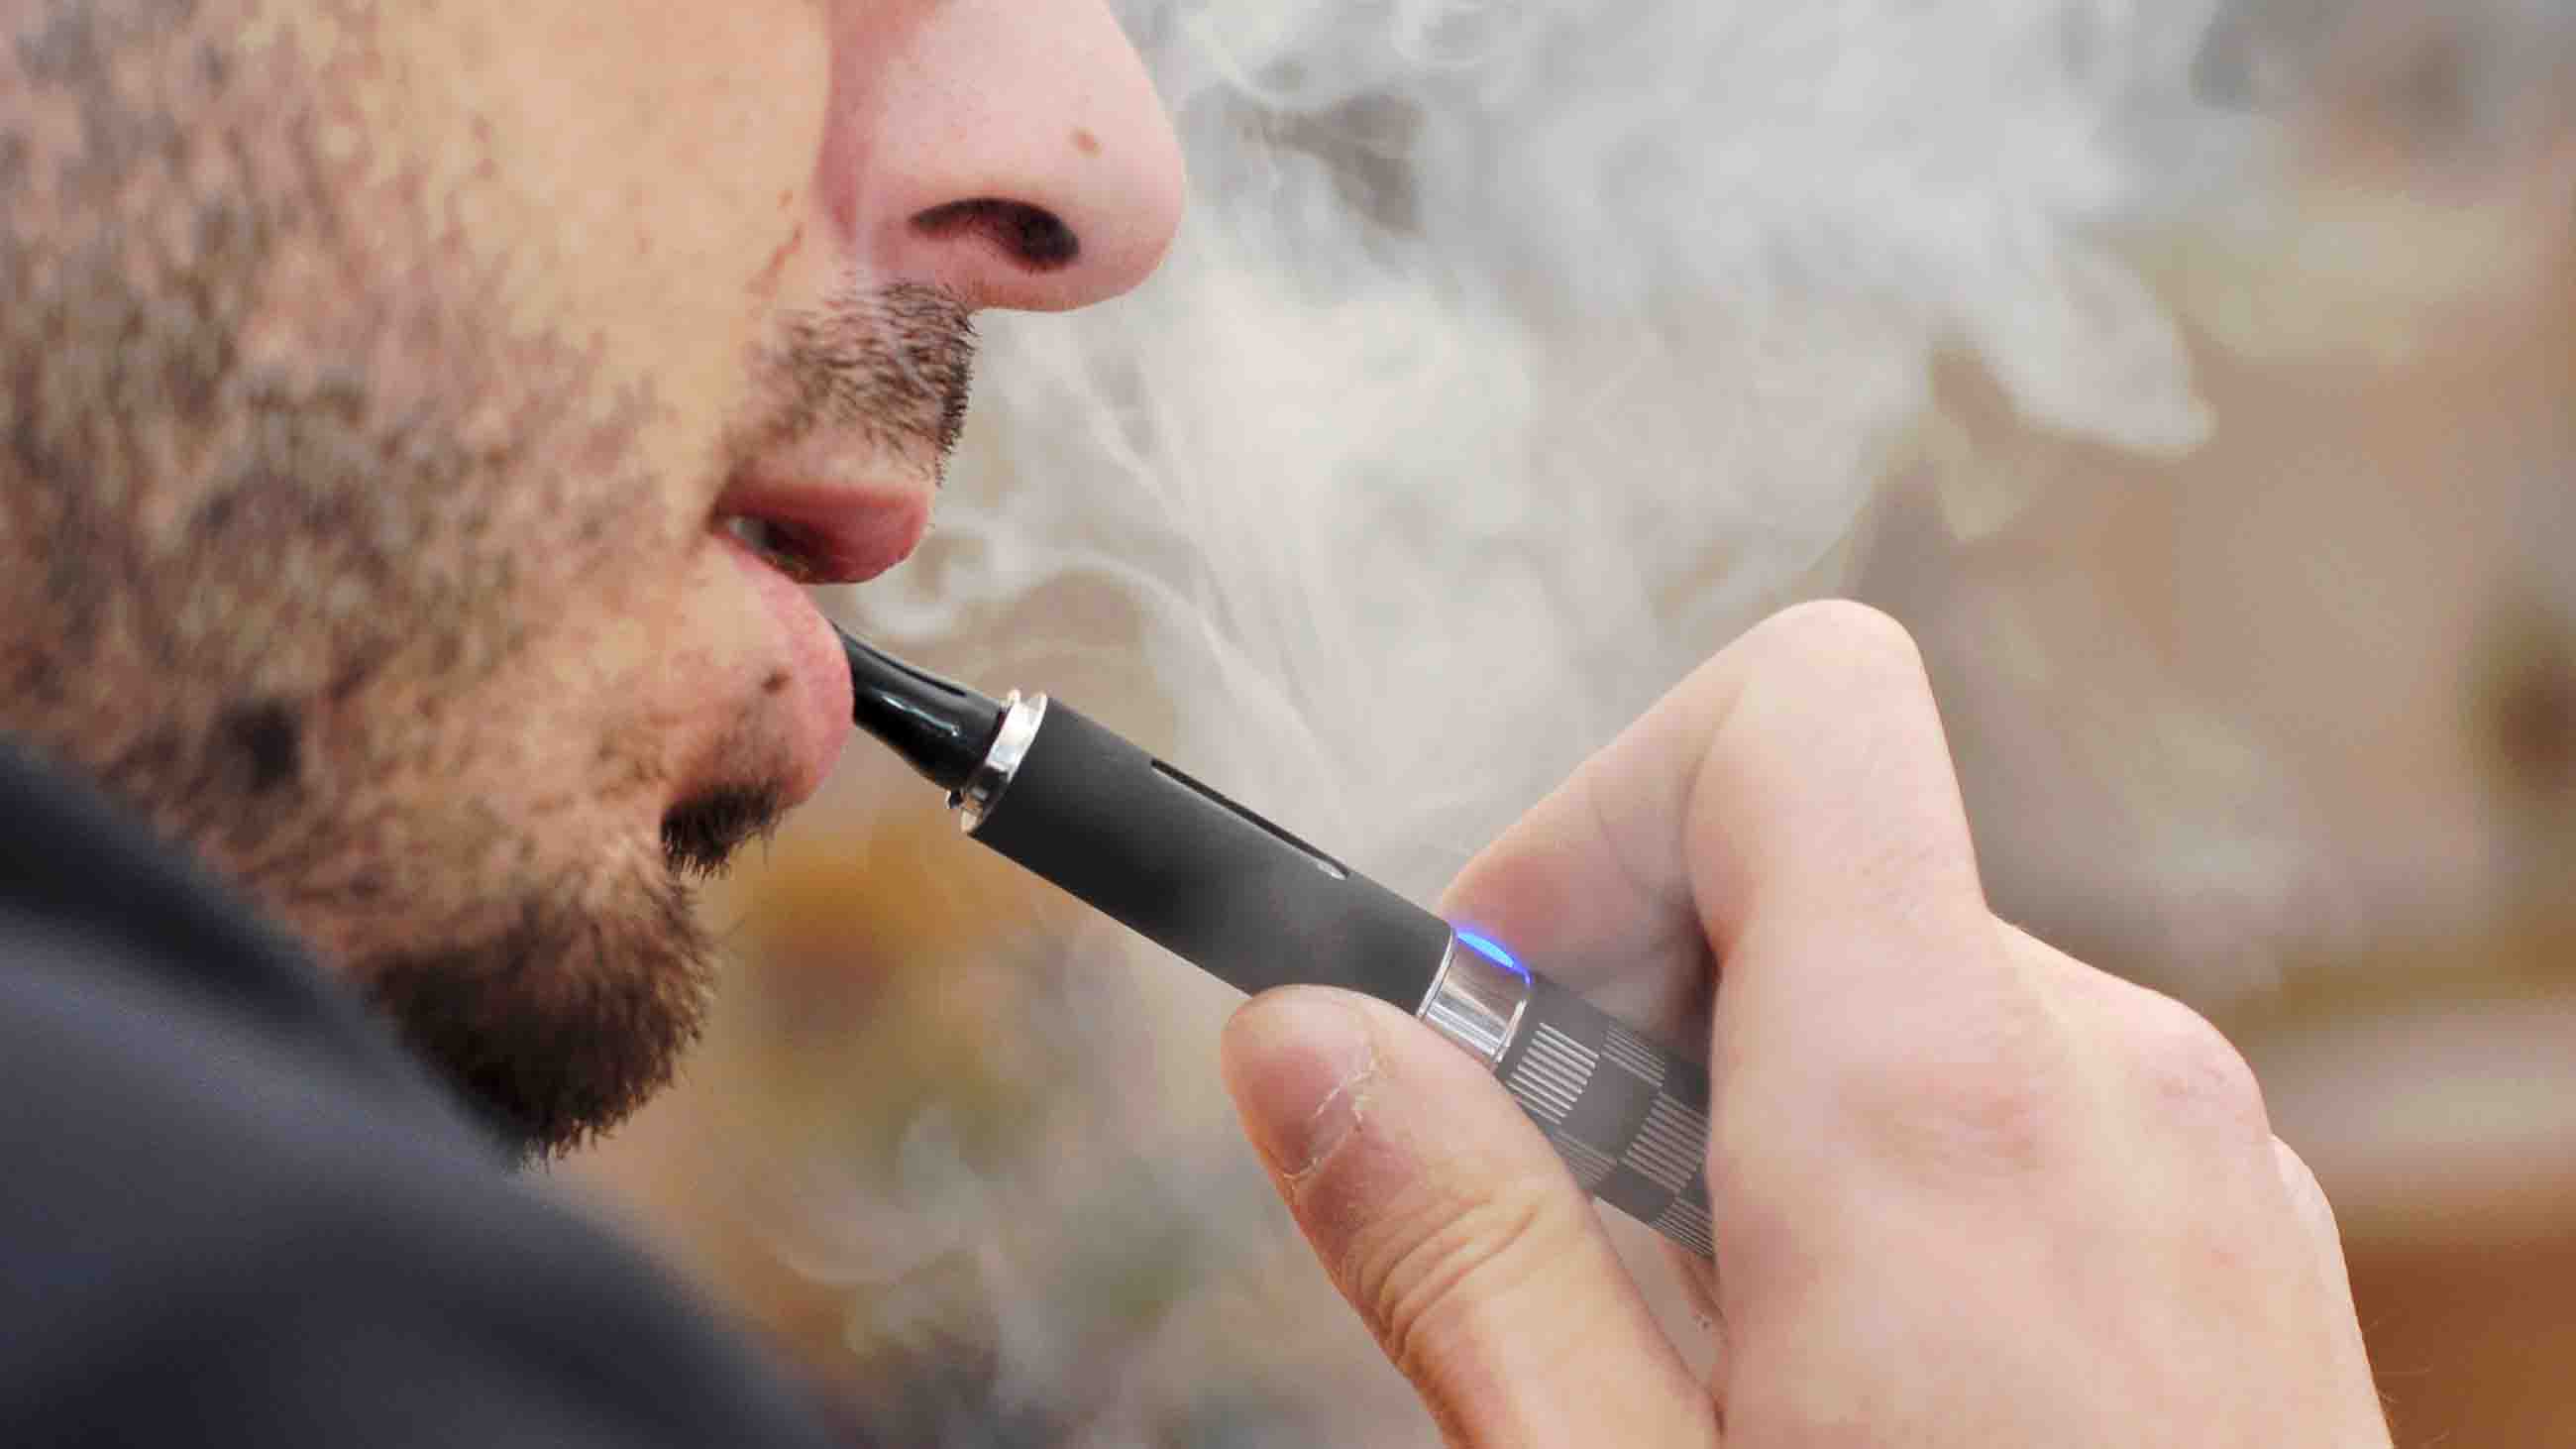 As of this week, the U.S. Centers for Disease Control and Prevention is reporting 530 cases of vaping-related lung illness, along with seven deaths.